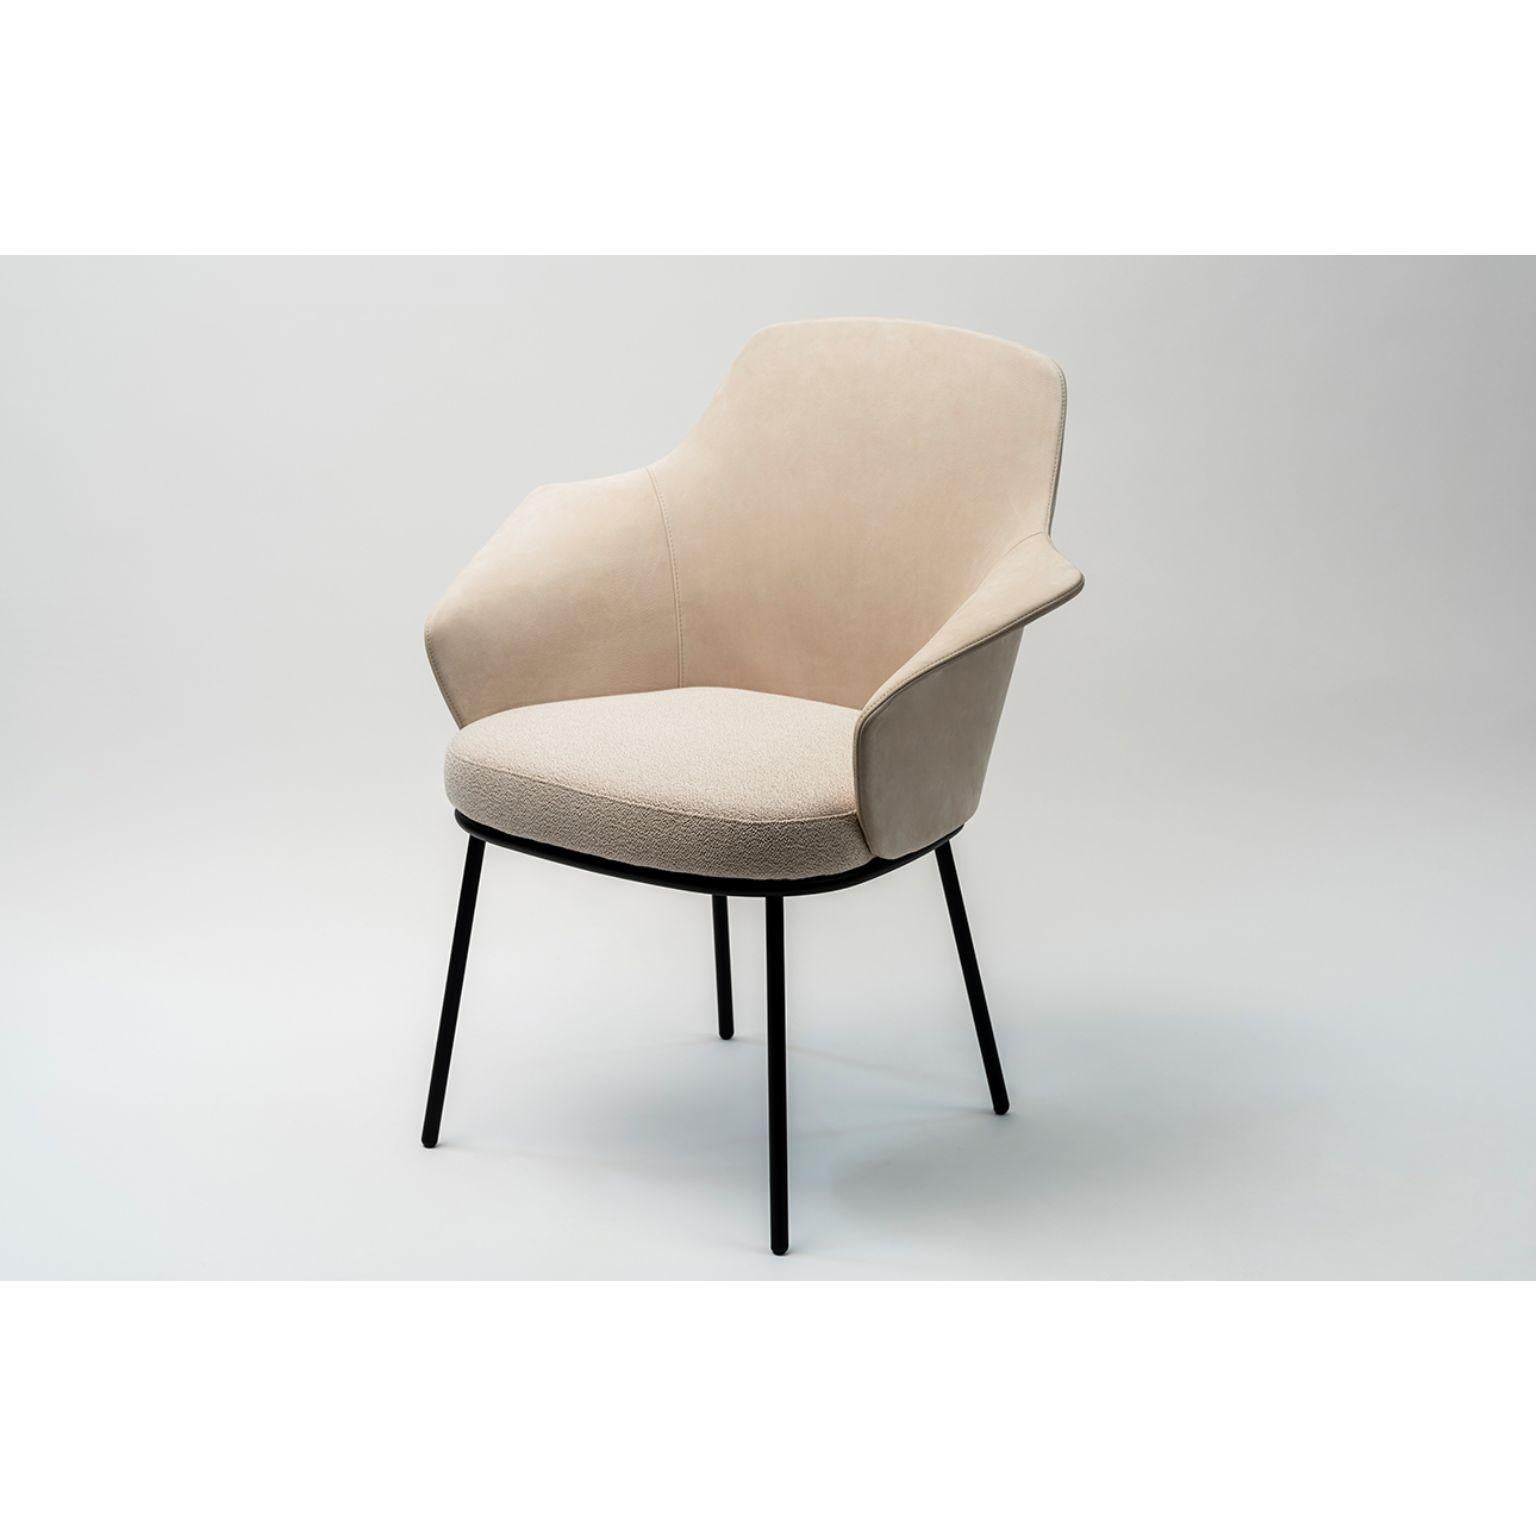 Linus armchair by MarCo Dessí
Materials: Upholstery: Fabric
Structure: Metal: Black powder-coated metal, black chrome metal
 Also available in Wood: Noce Canaletto solid wood, coral/dark green/black stained wood.
Dimensions: W 71.9 x D 60.2 x H